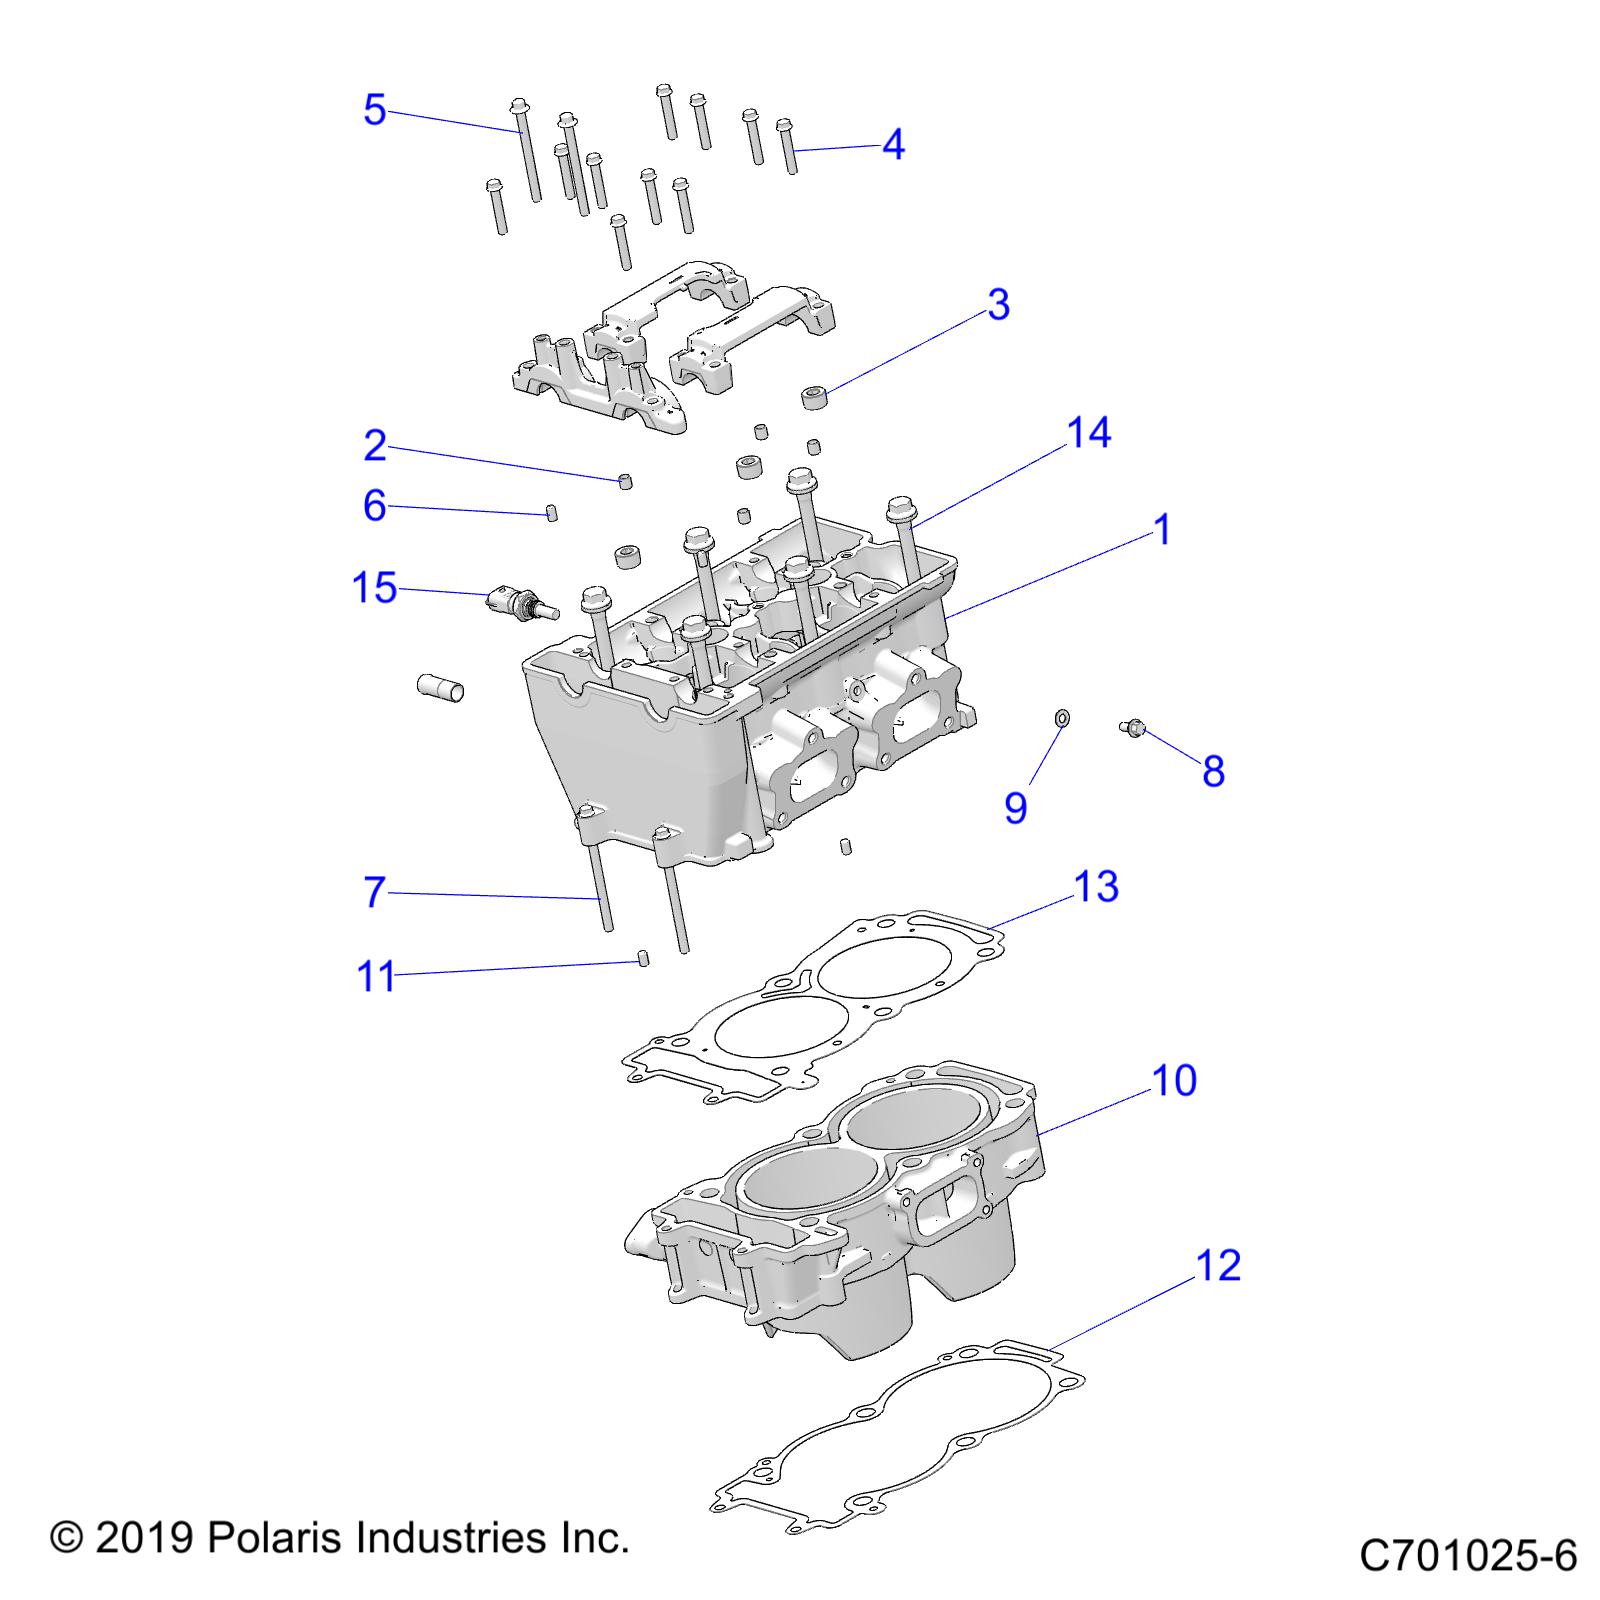 Part Number : 3022798 HEAD CYLINDER ASSEMBLY